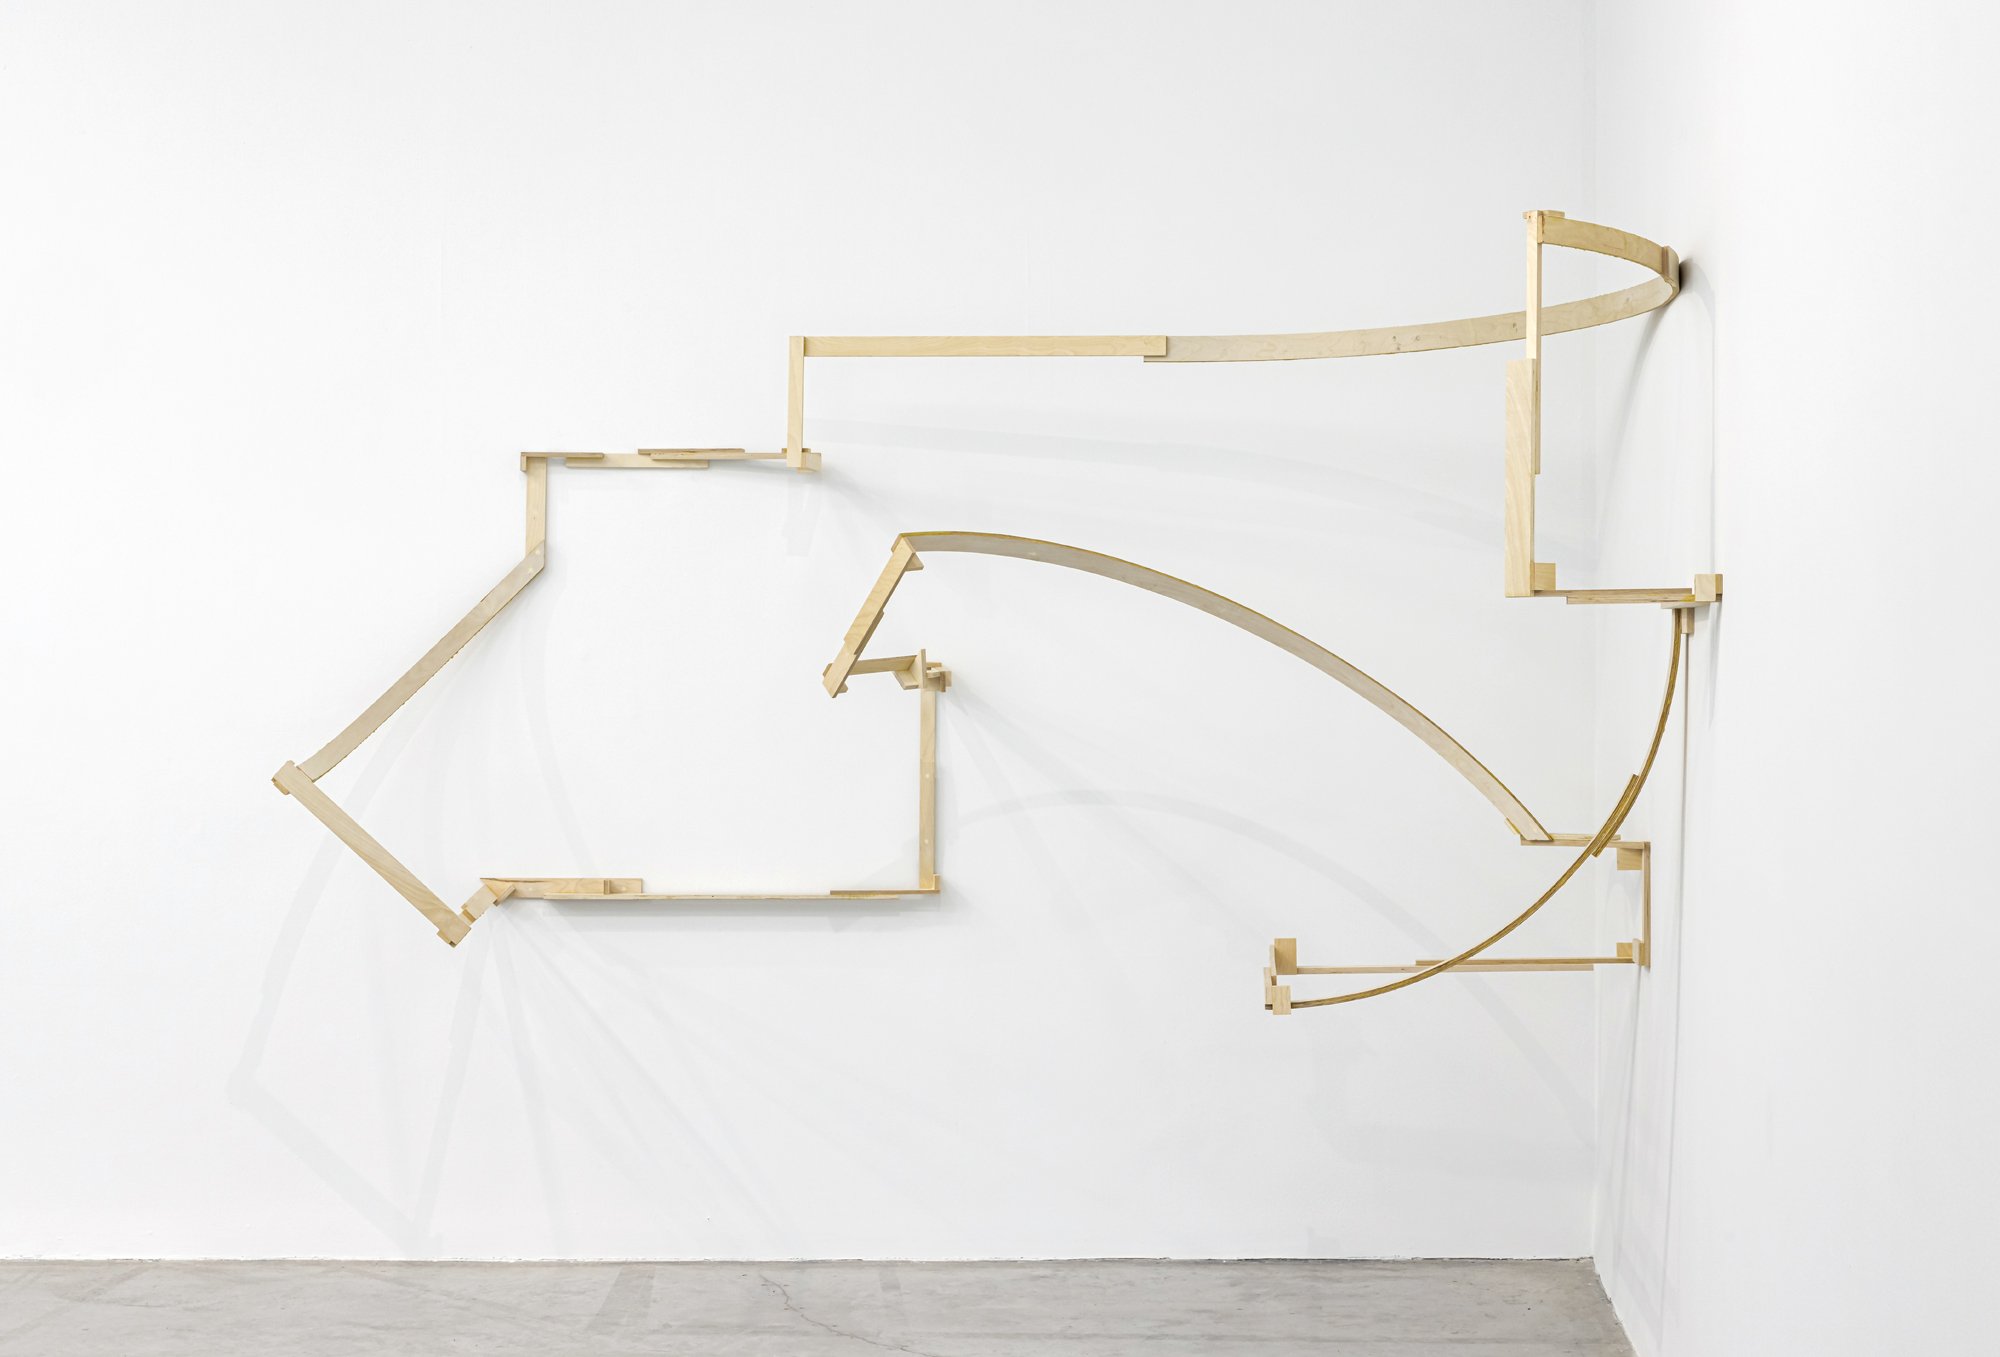   Outline 1,  2023, site-specific installation, plywood and glue, 59 x 141 x 105 